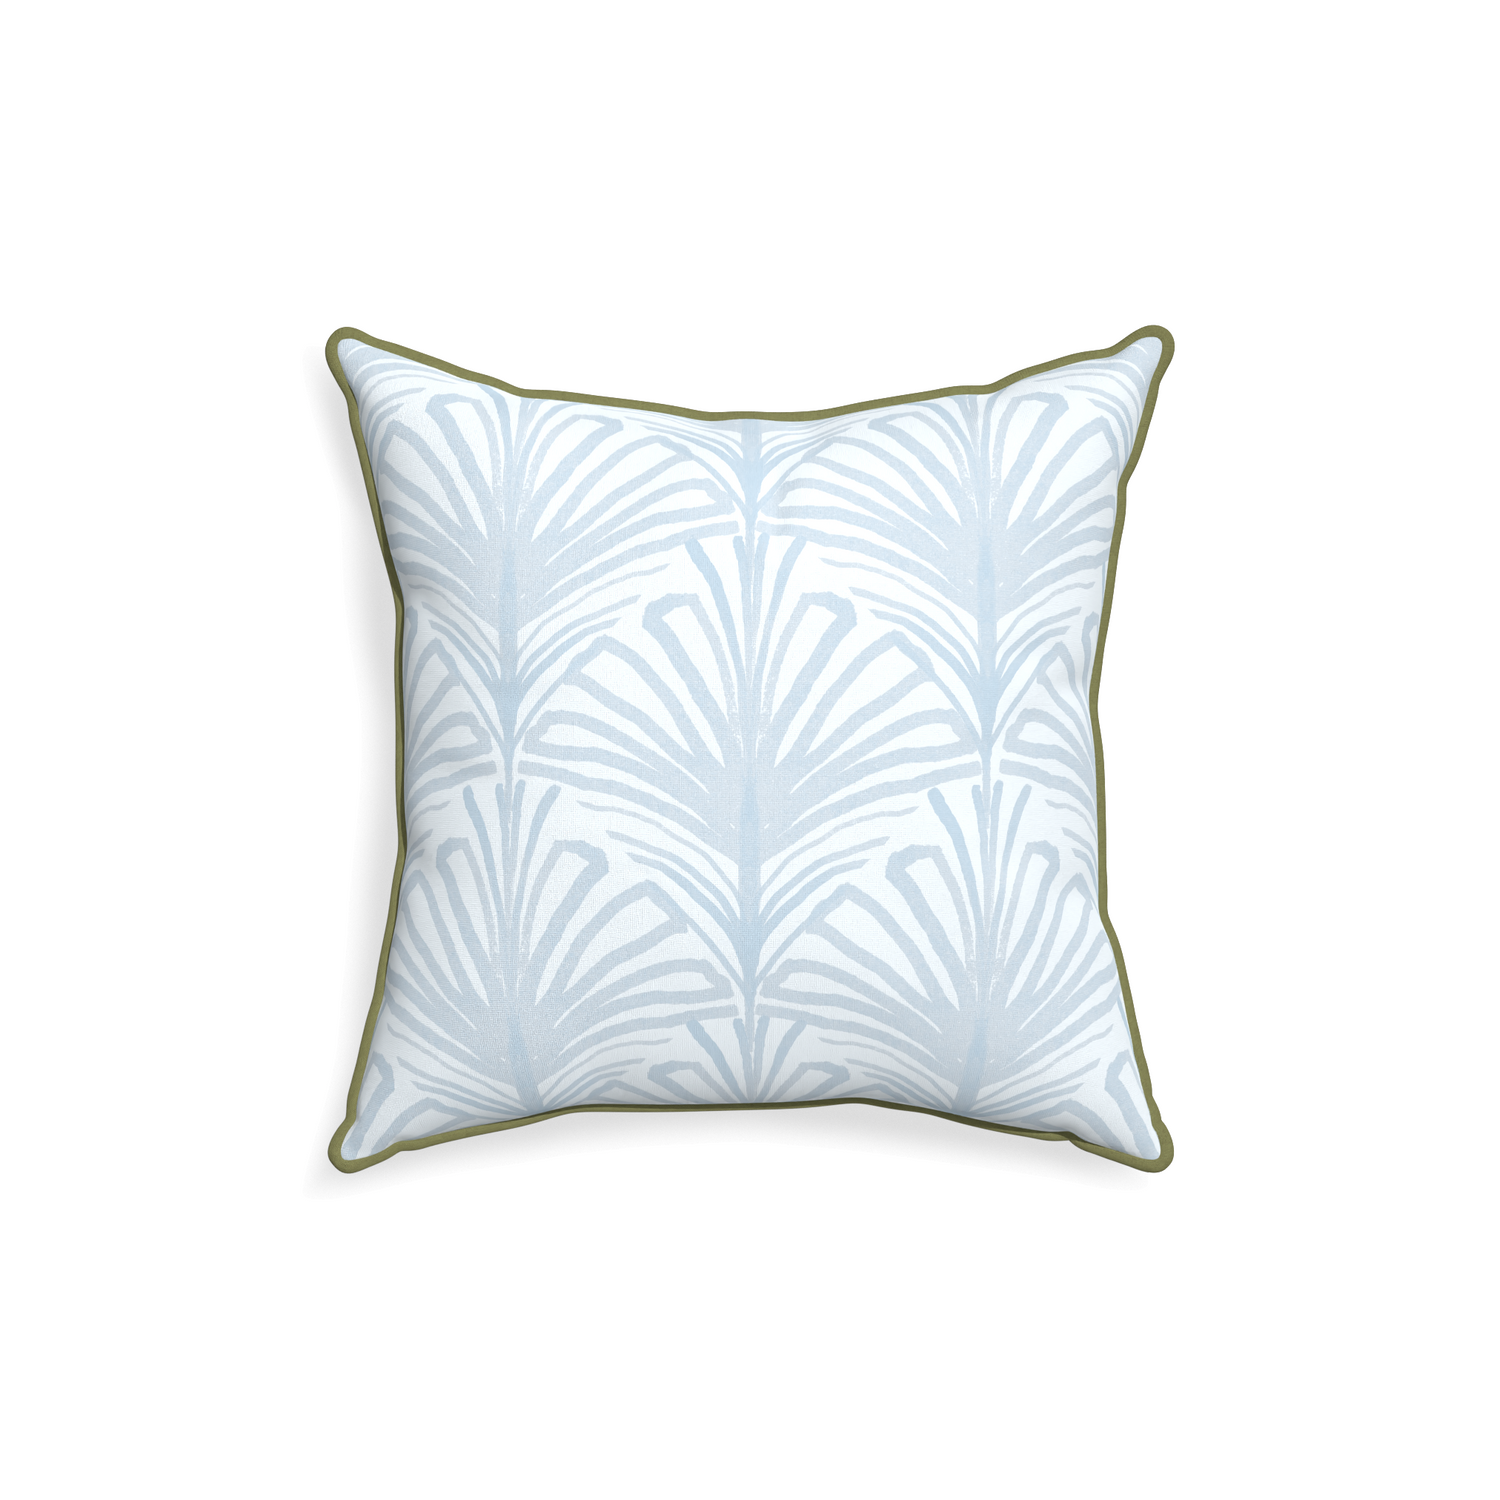 18-square suzy sky custom pillow with moss piping on white background